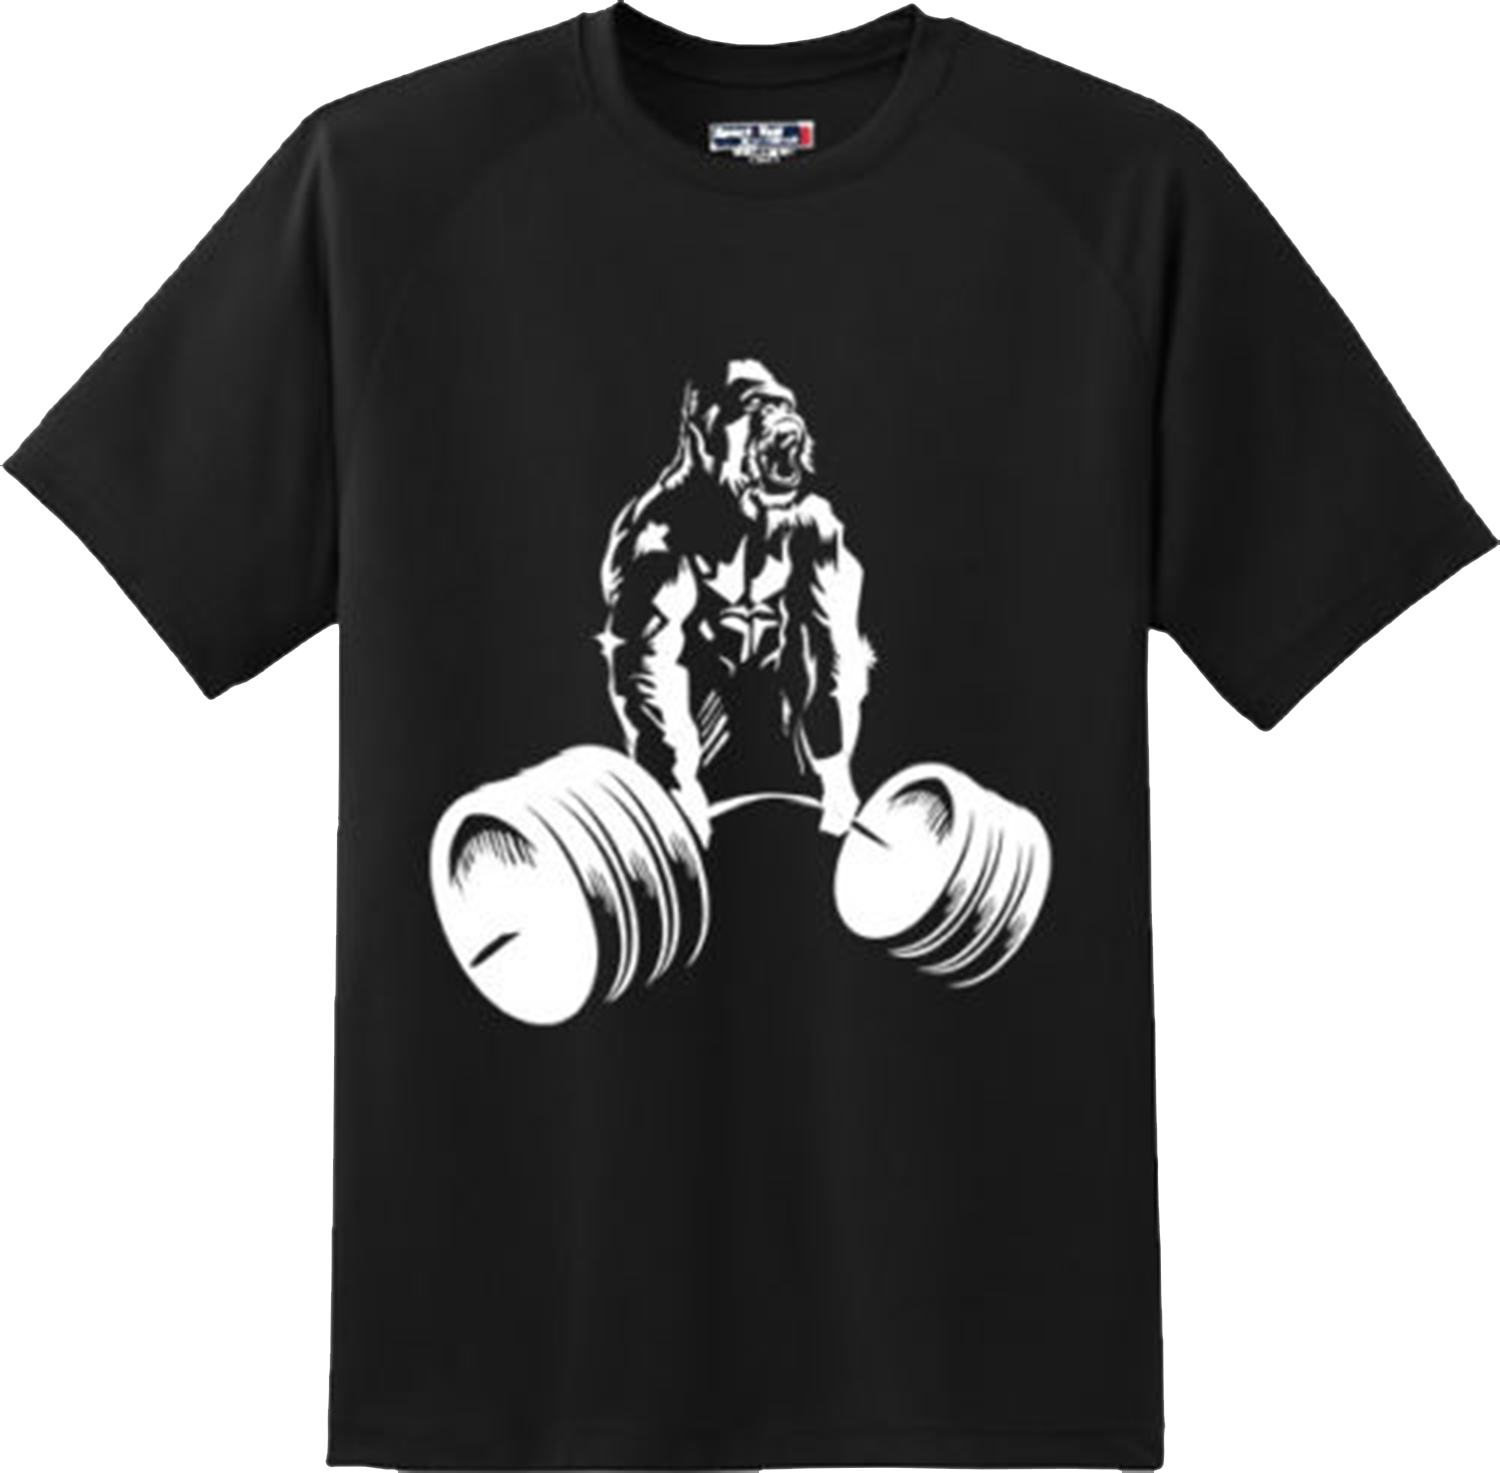 Funny Gorilla Power Lifter  Gym Fitness Weight Training T Shirt New Graphic Tee